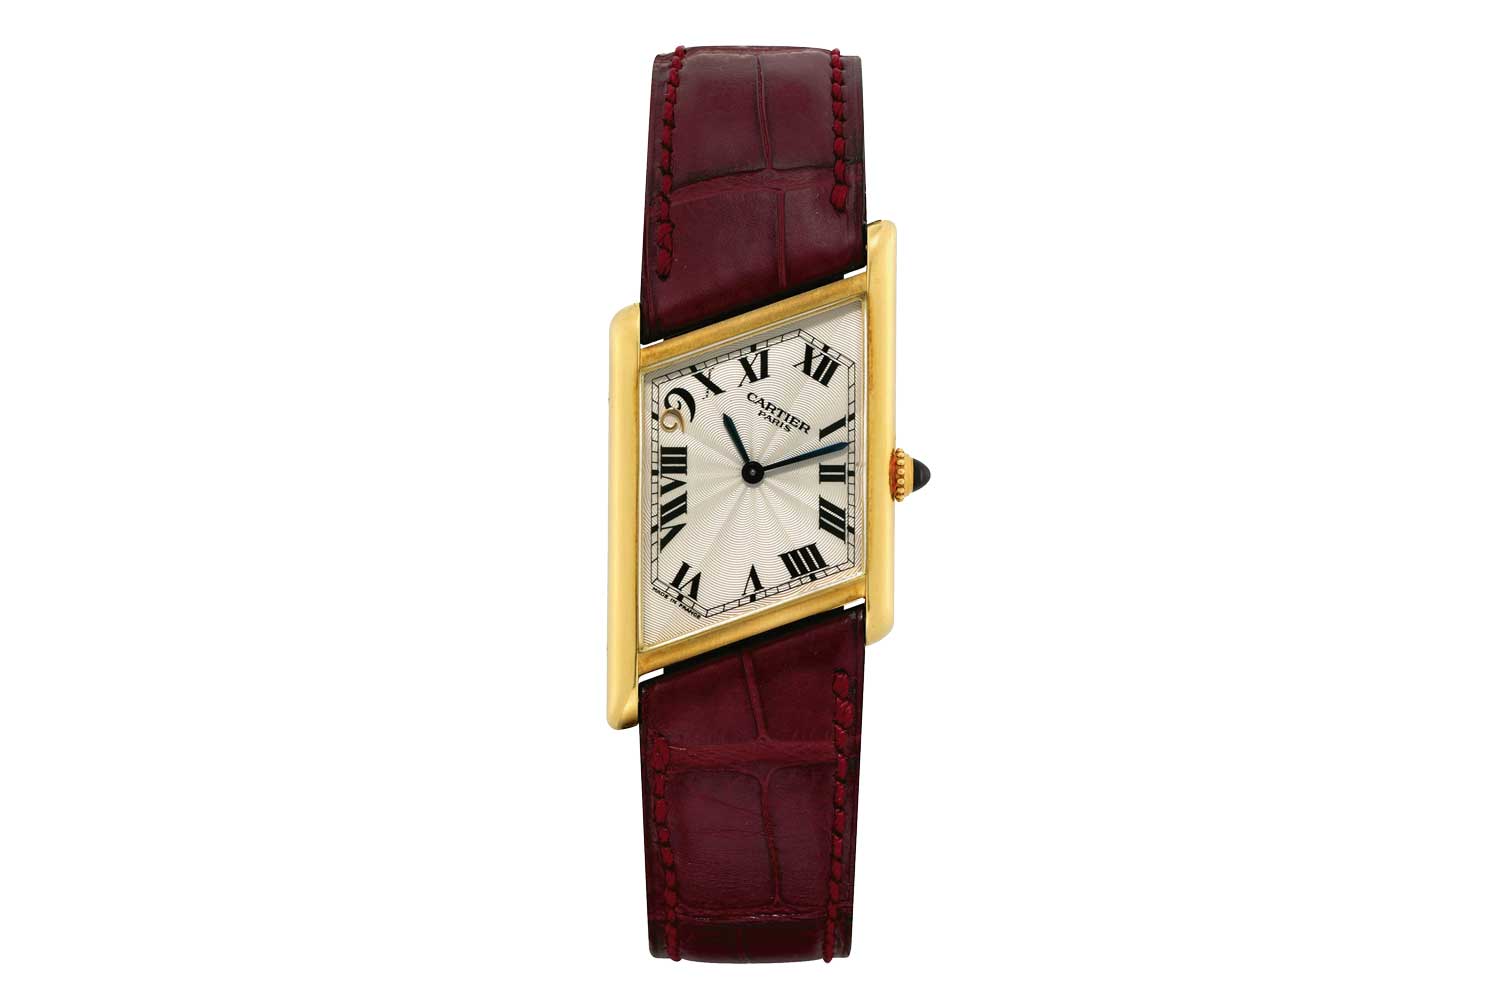 In 1999, Cartier created two sets of watches produced in left-handed and right-handed versions, each in a 99-piece limited run to commemorate the Macau Handover; the watch, in a smaller size (23mm by 32mm), had a Roman-numeral dial but with an applied 18K gold “9” above the Arabic-numeral “9” to form “99”; pictured here is the version of the watch with the crown on the right